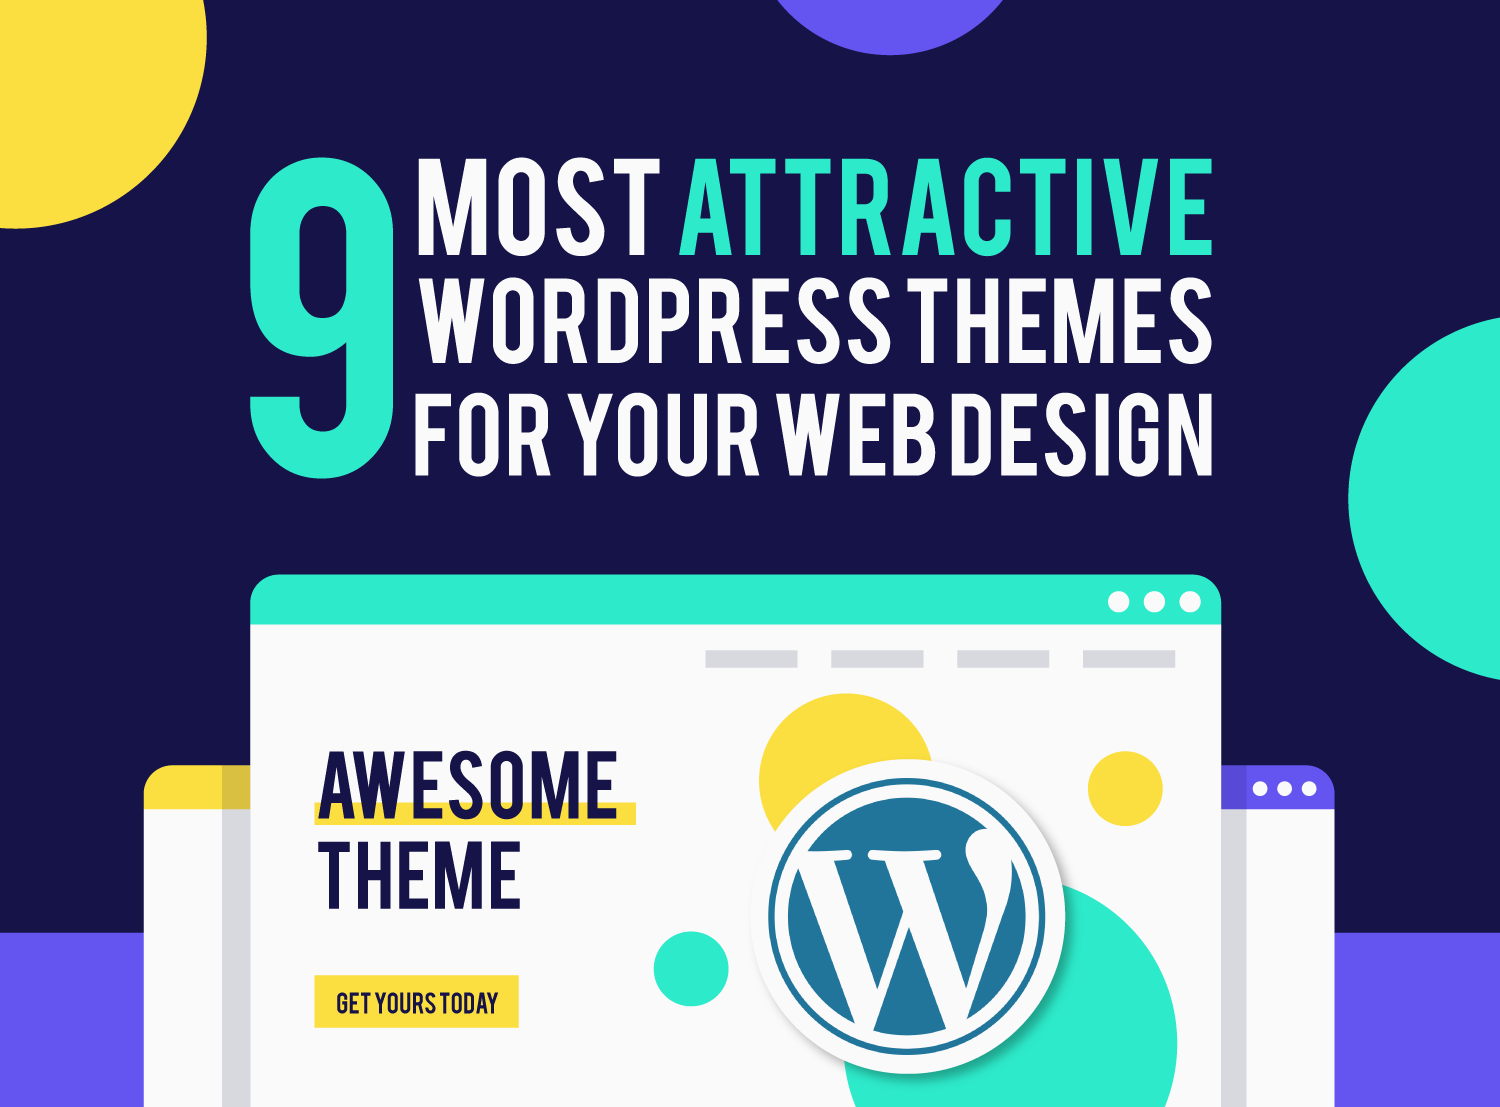 9 Attractive WordPress Themes for Your Web Design by Inkyy Web Design Studio